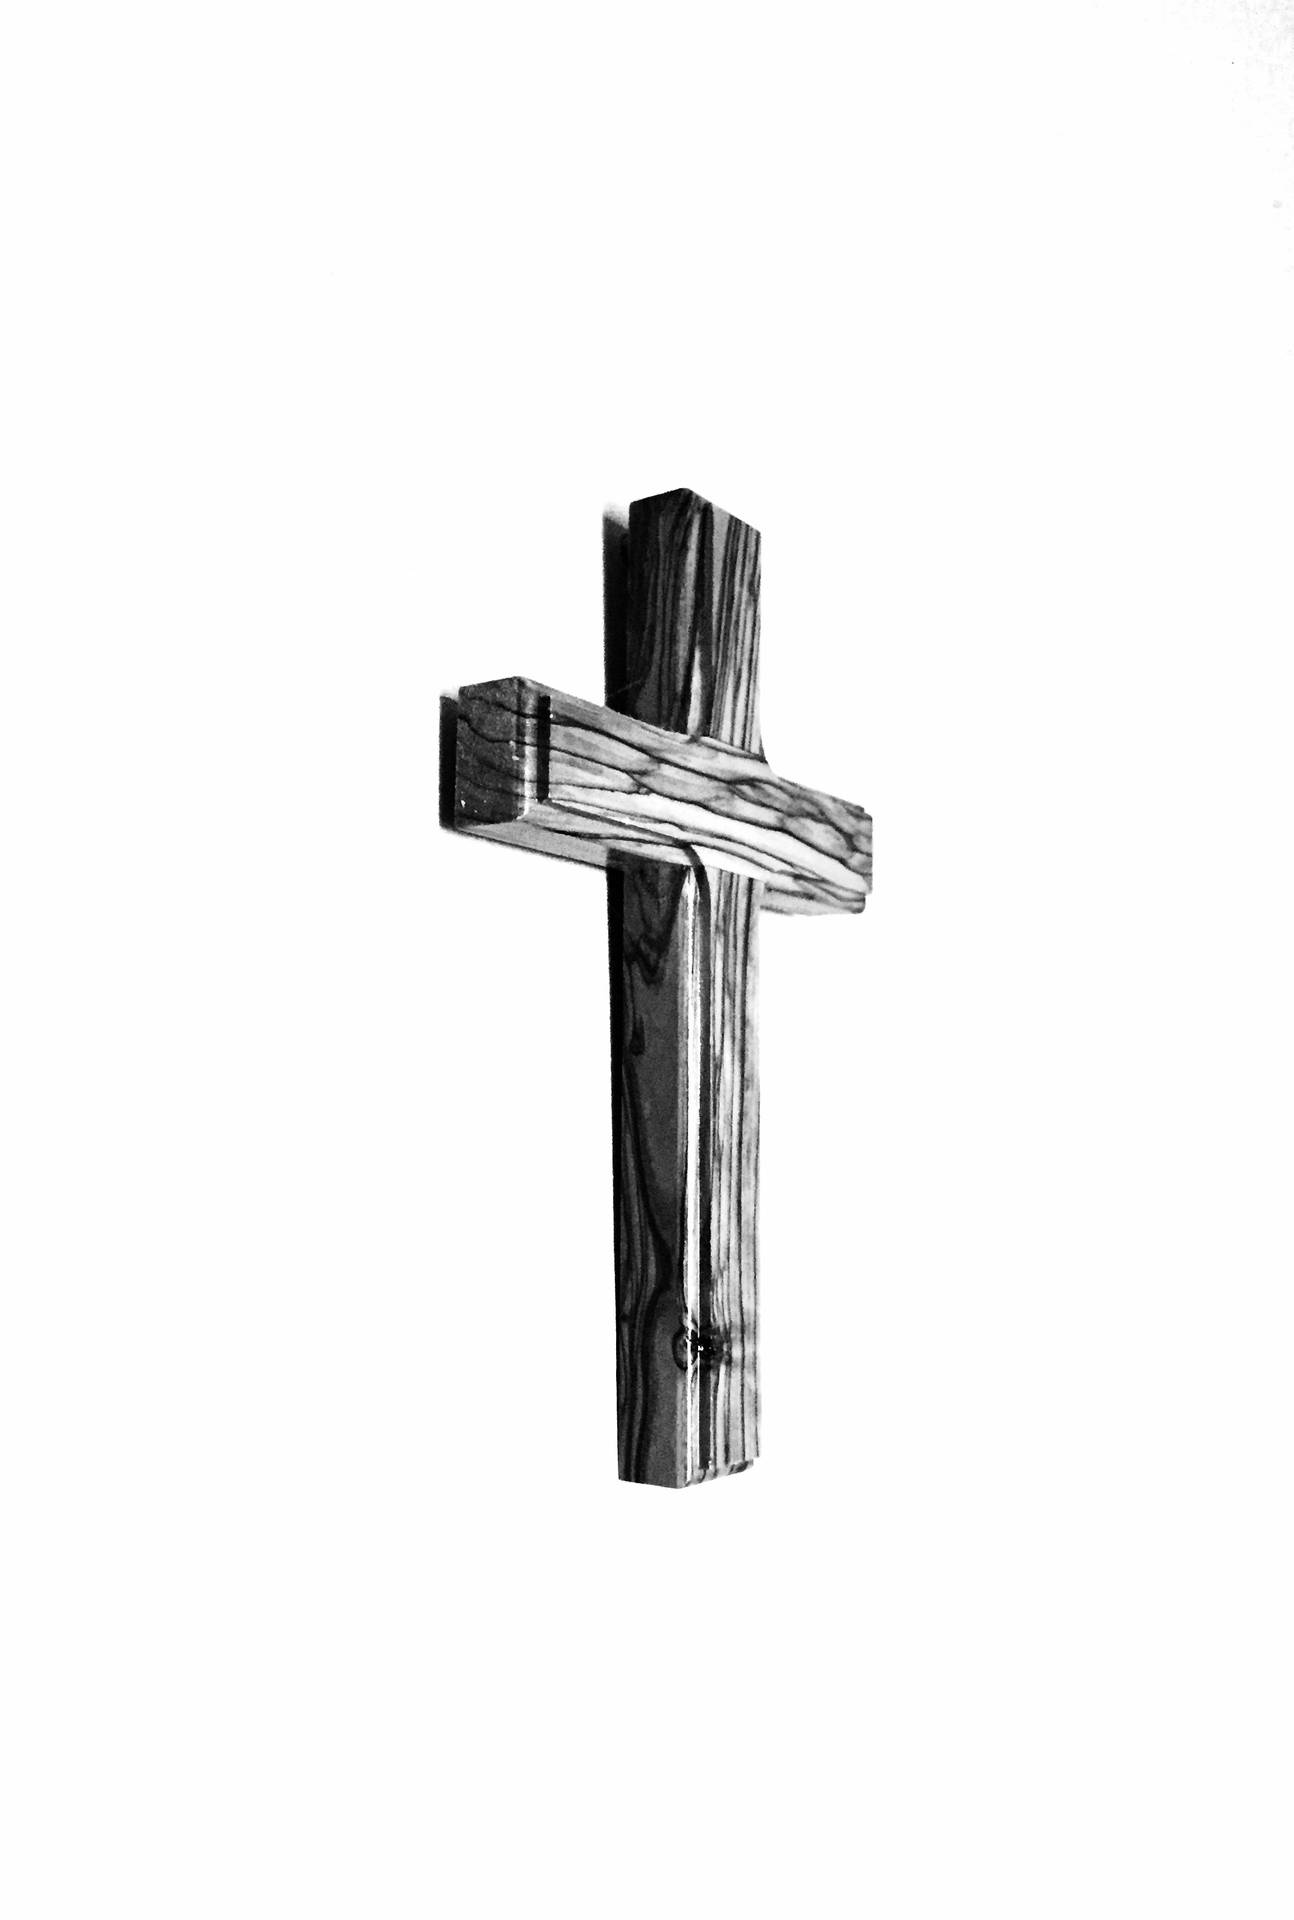 2174X3226 Cross Wallpaper and Background